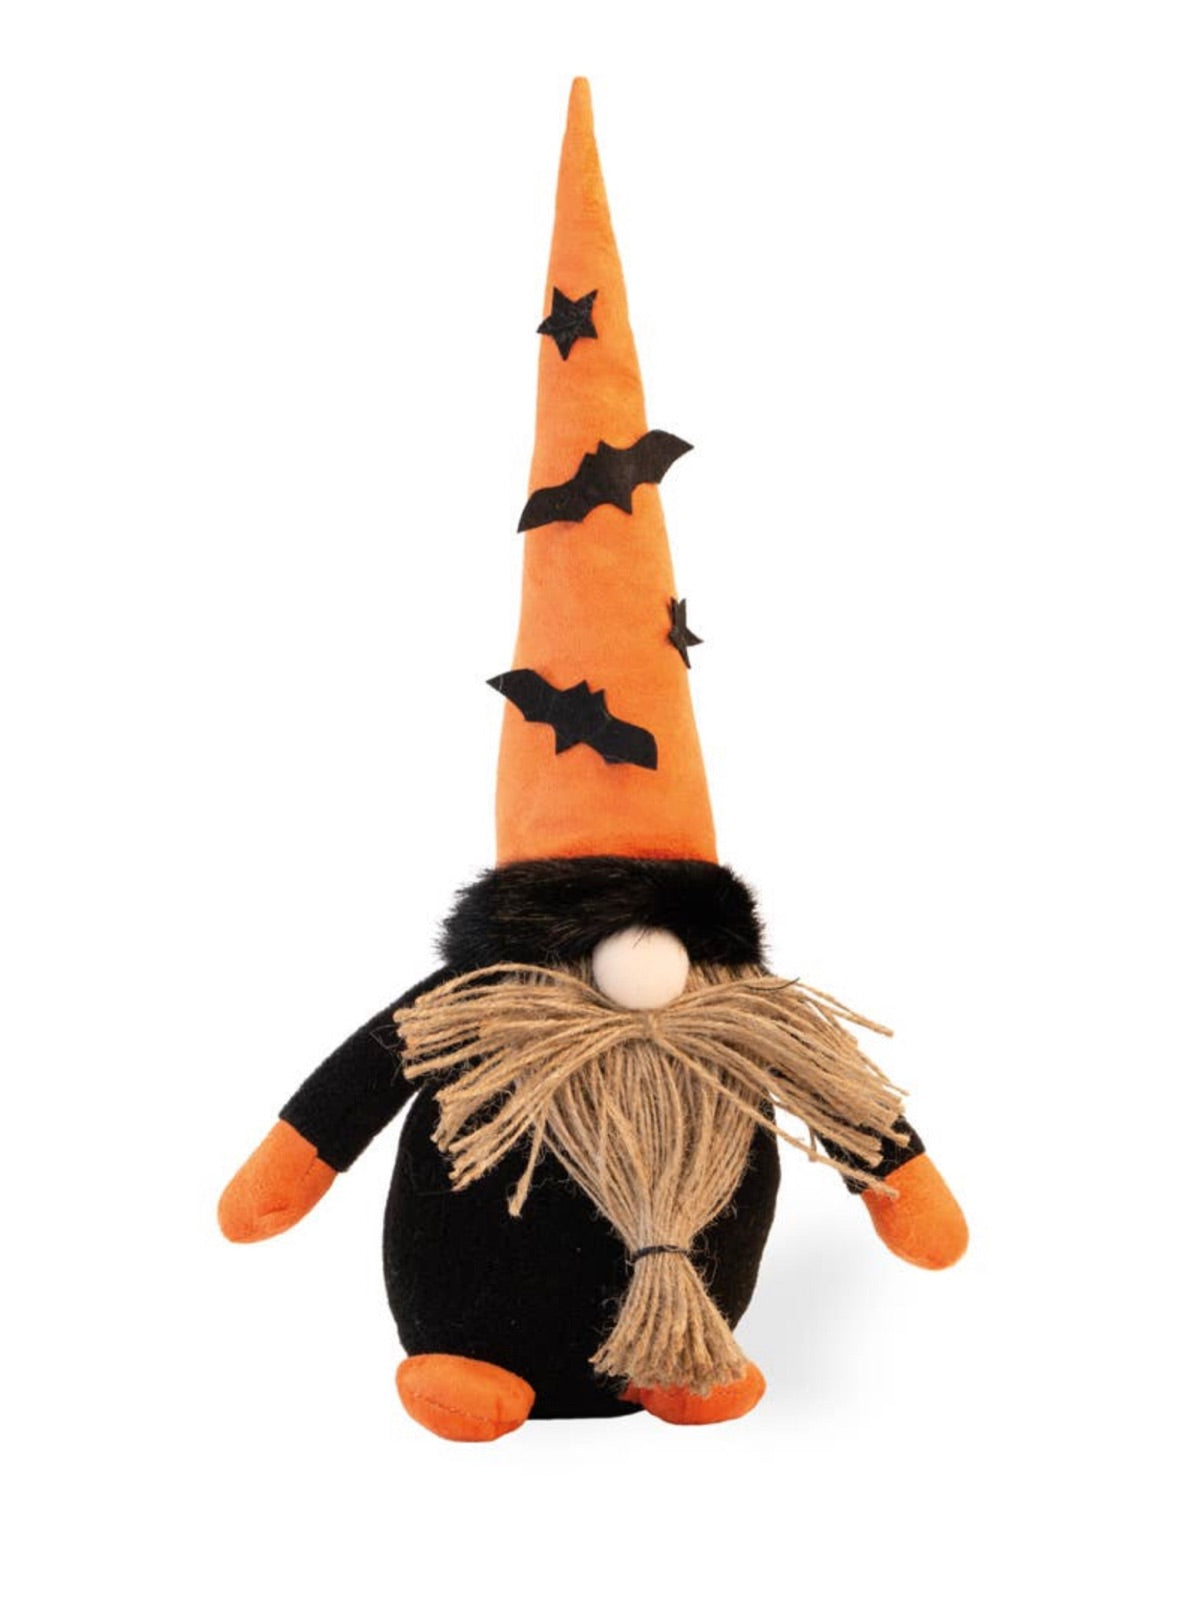 Prepare your home for the harvest season with the Boston International Giant Merlin Gnome. Giant merlin gnome features fabric and sand construction, decorated with Halloween themed colors for a spooky addition to your home.